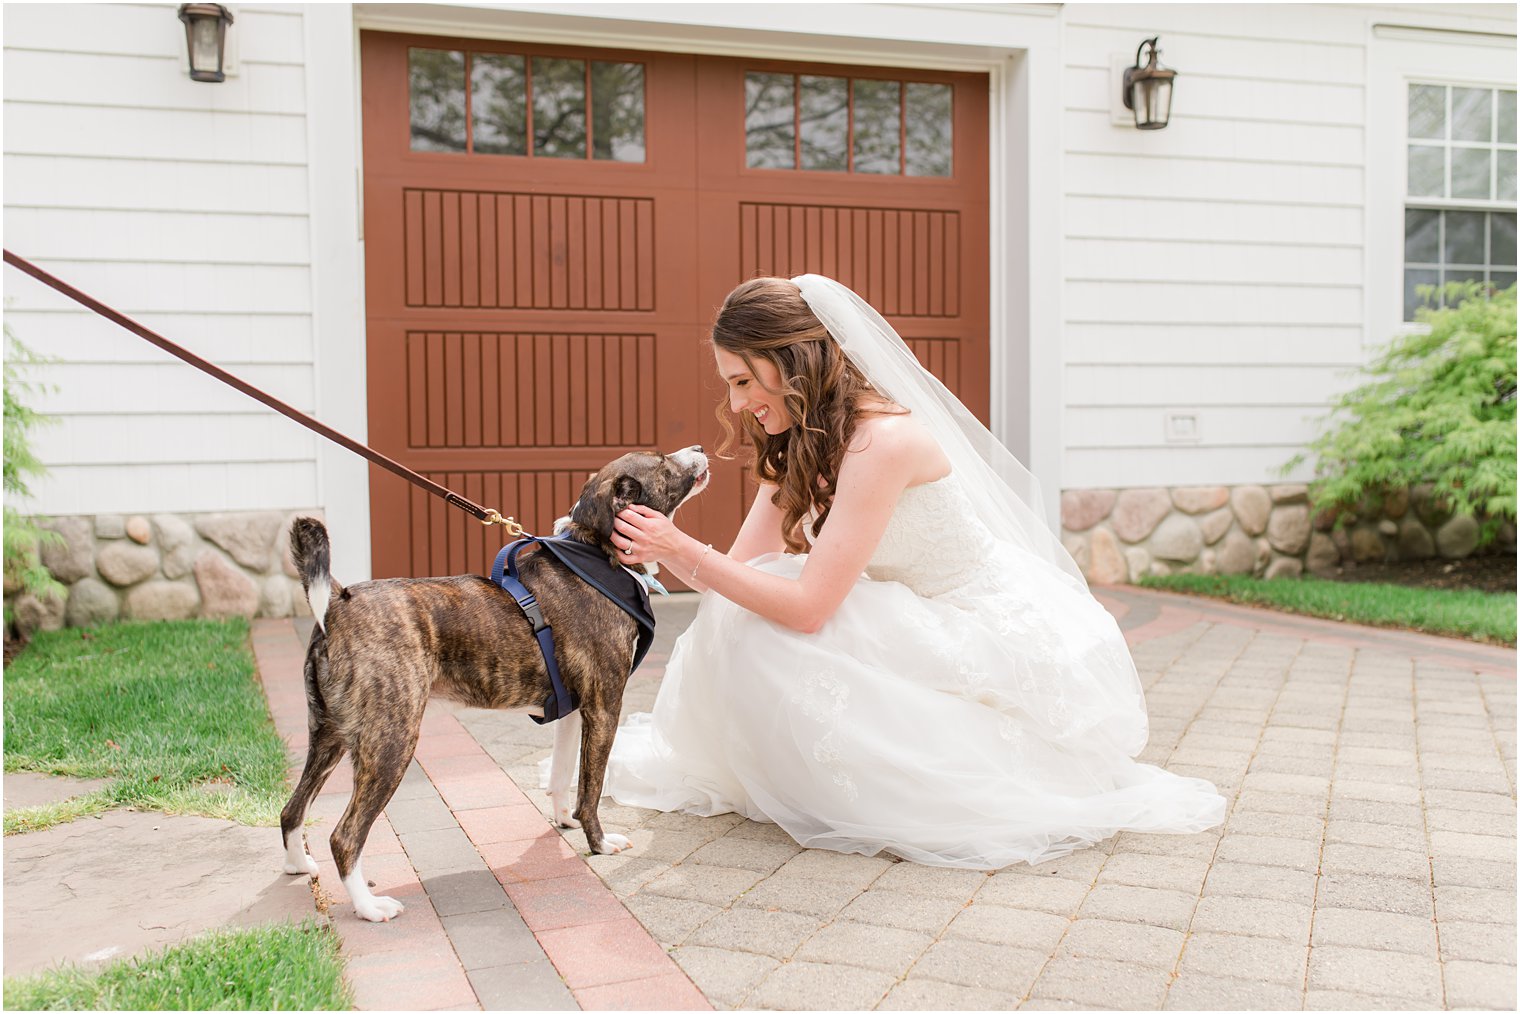 bride pets dog on wedding day in New Jersey 